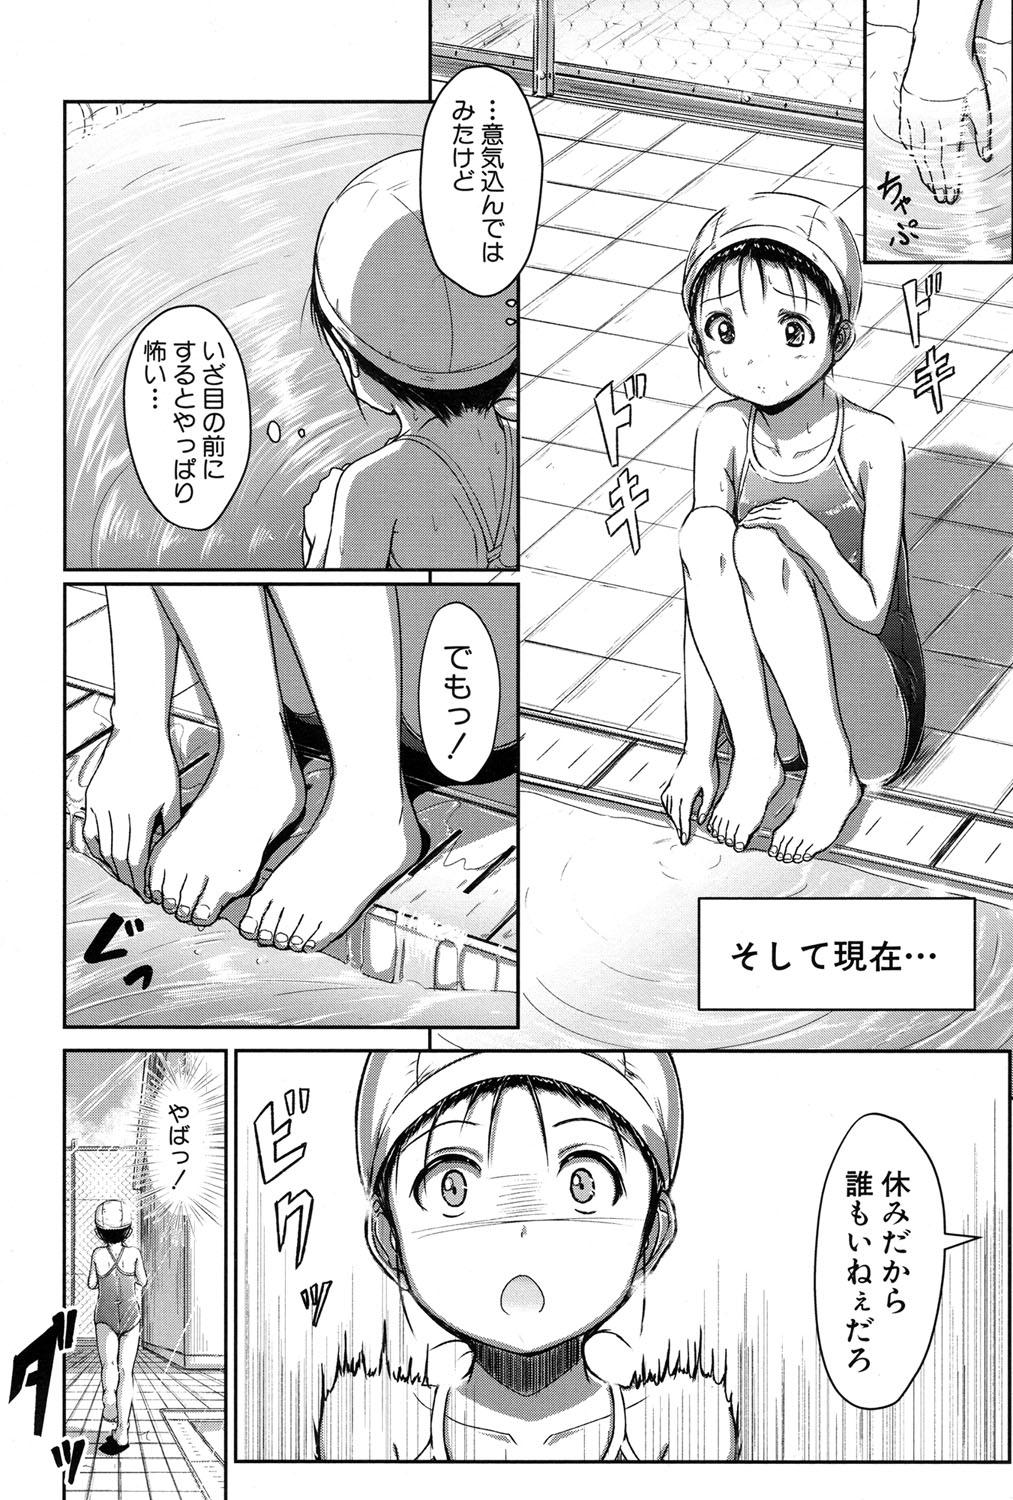 Unshaved [Seito A] Oyogeru You ni Naritai na - I want to be able to swim. Ch. 1-2 [Digital] Suck Cock - Page 6